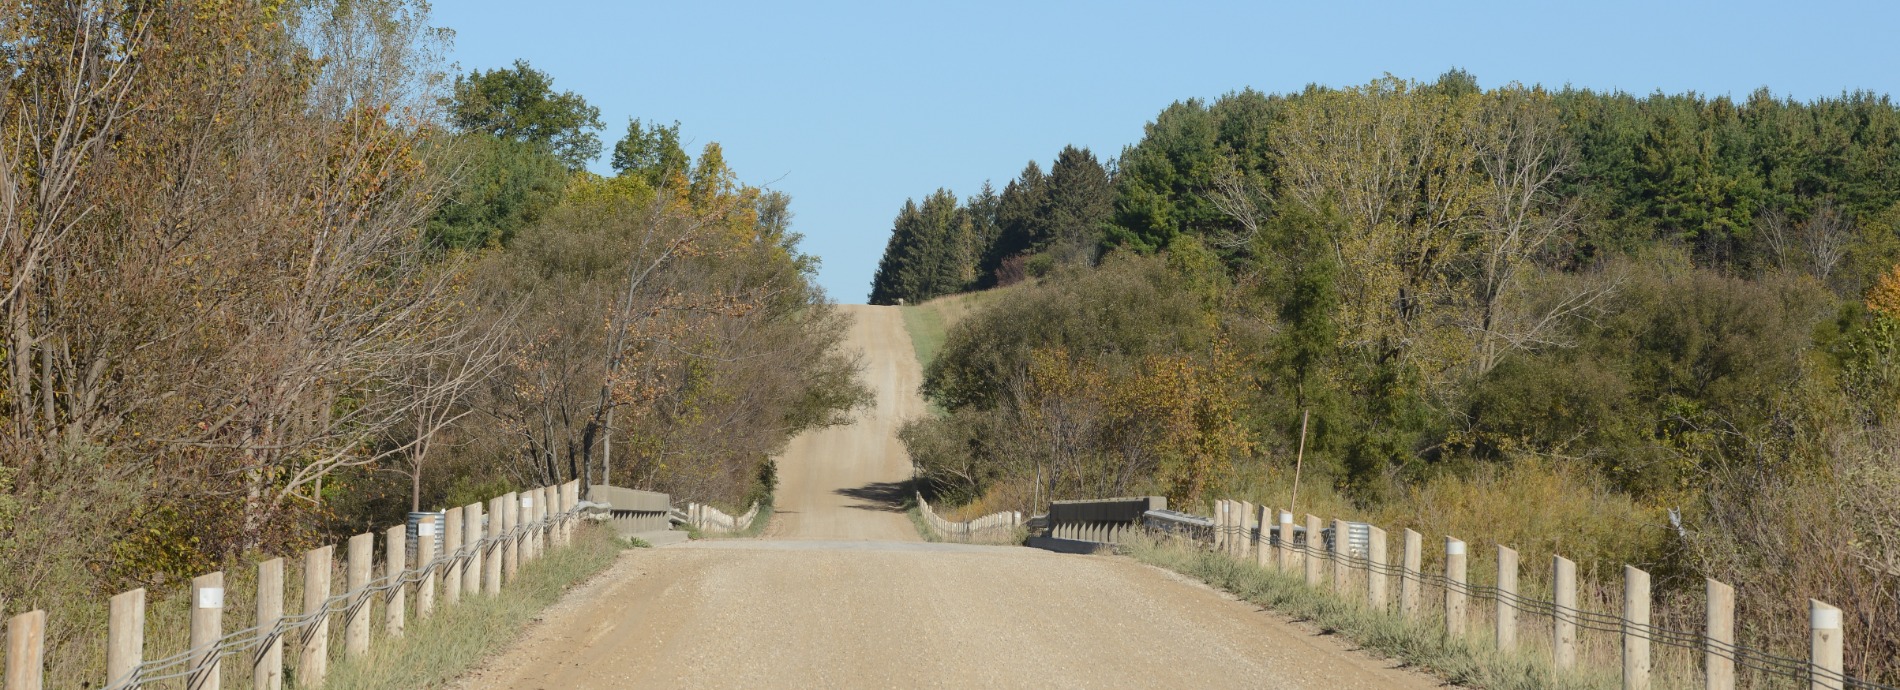 gravel road with green trees on either side. View of the road from a distance looking forward. Wooden guard rails along part of the road